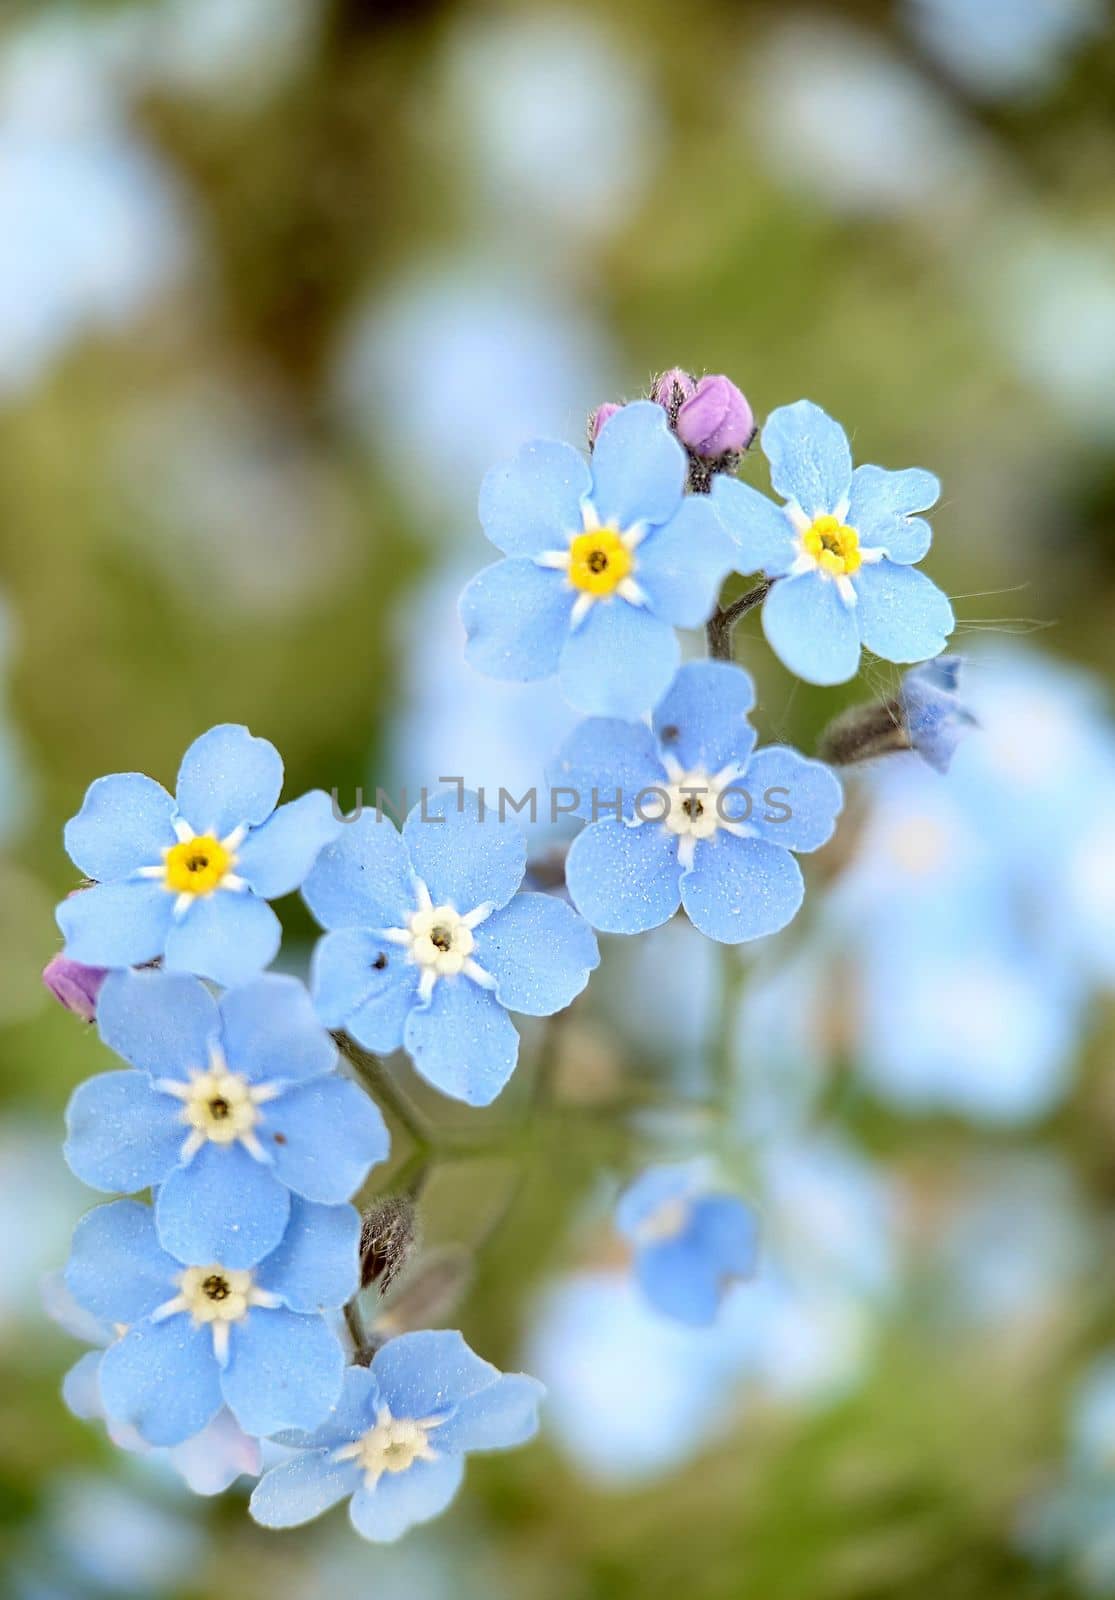 Macrophotography.Background image of small forget-me-nots flowers in the open air. Texture or background.Selective focus.